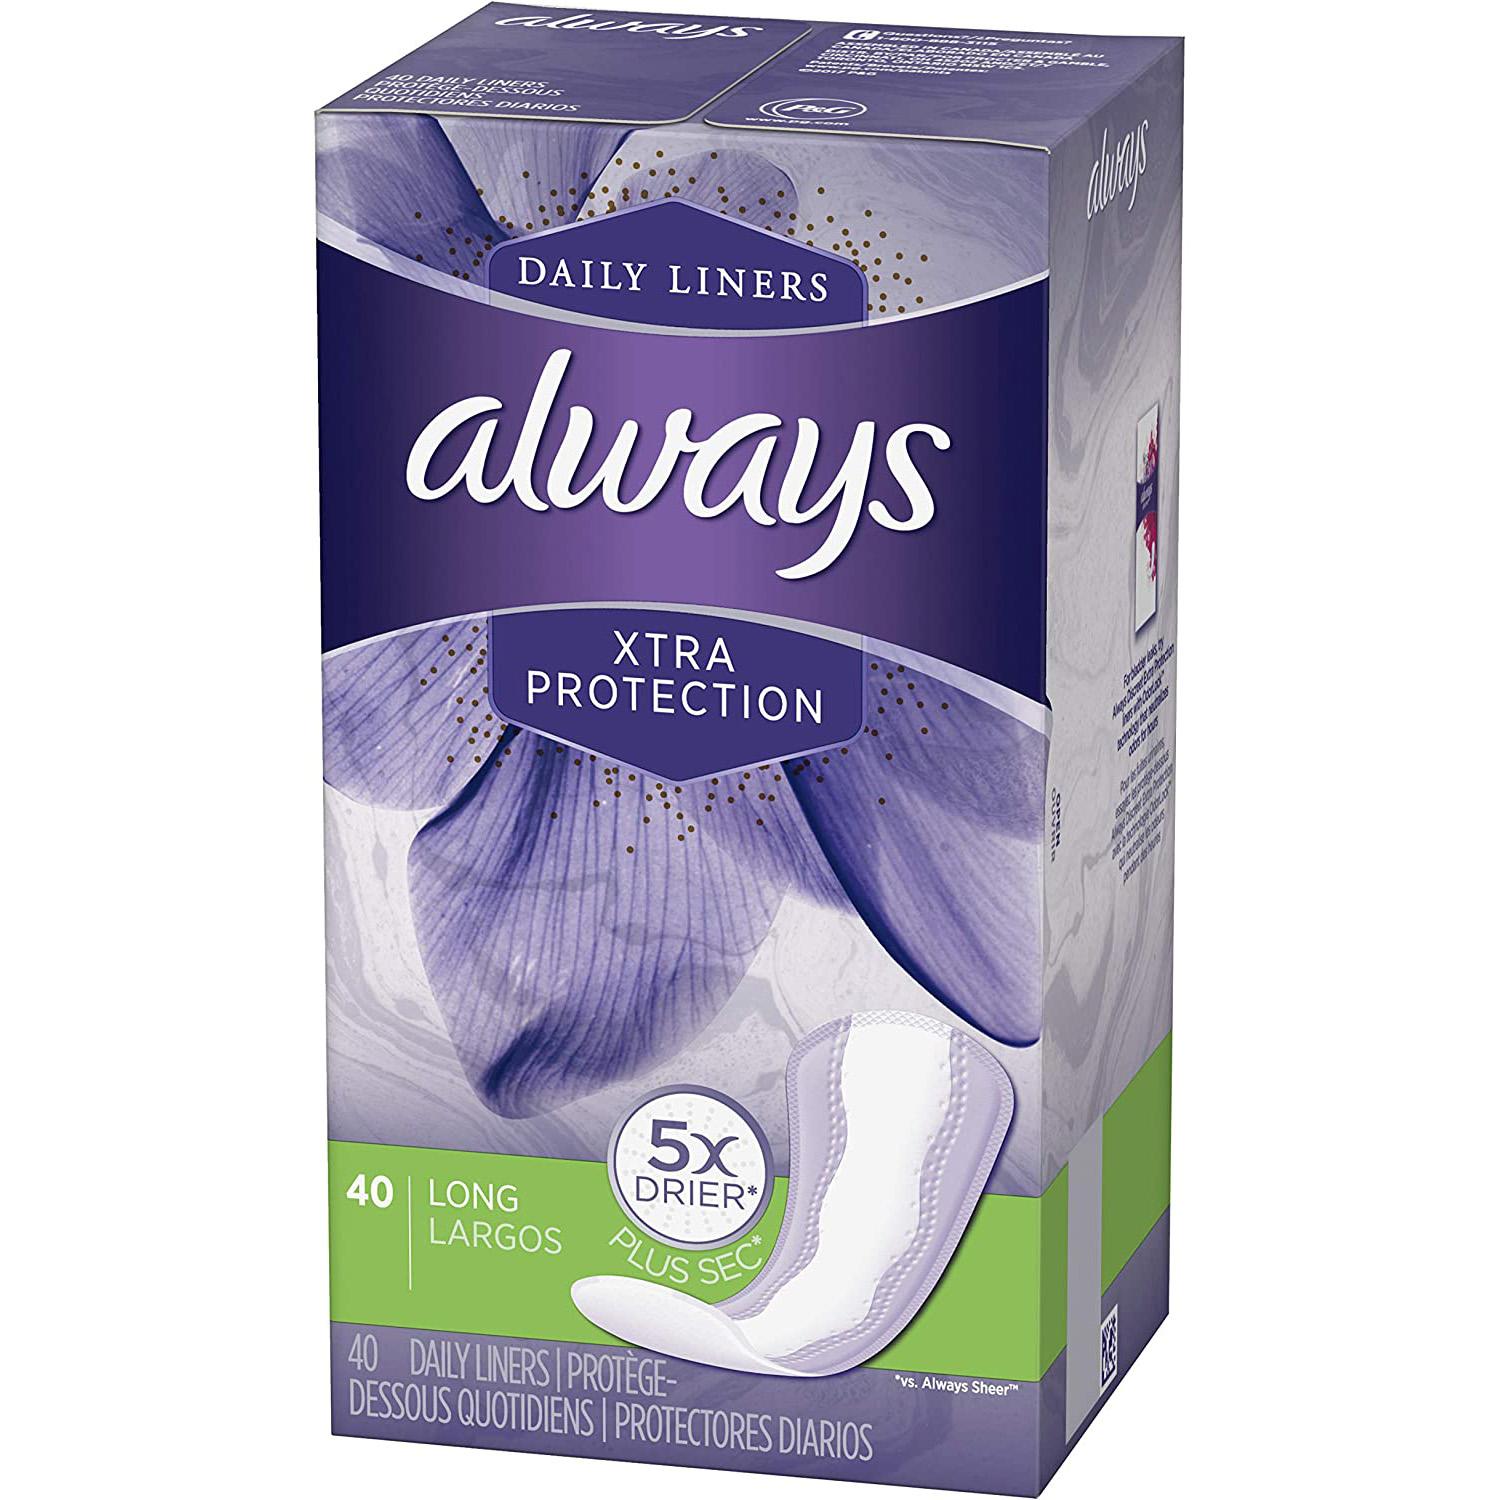 40 Always Xtra Protection Daily Liners Long Unscented for $1.50